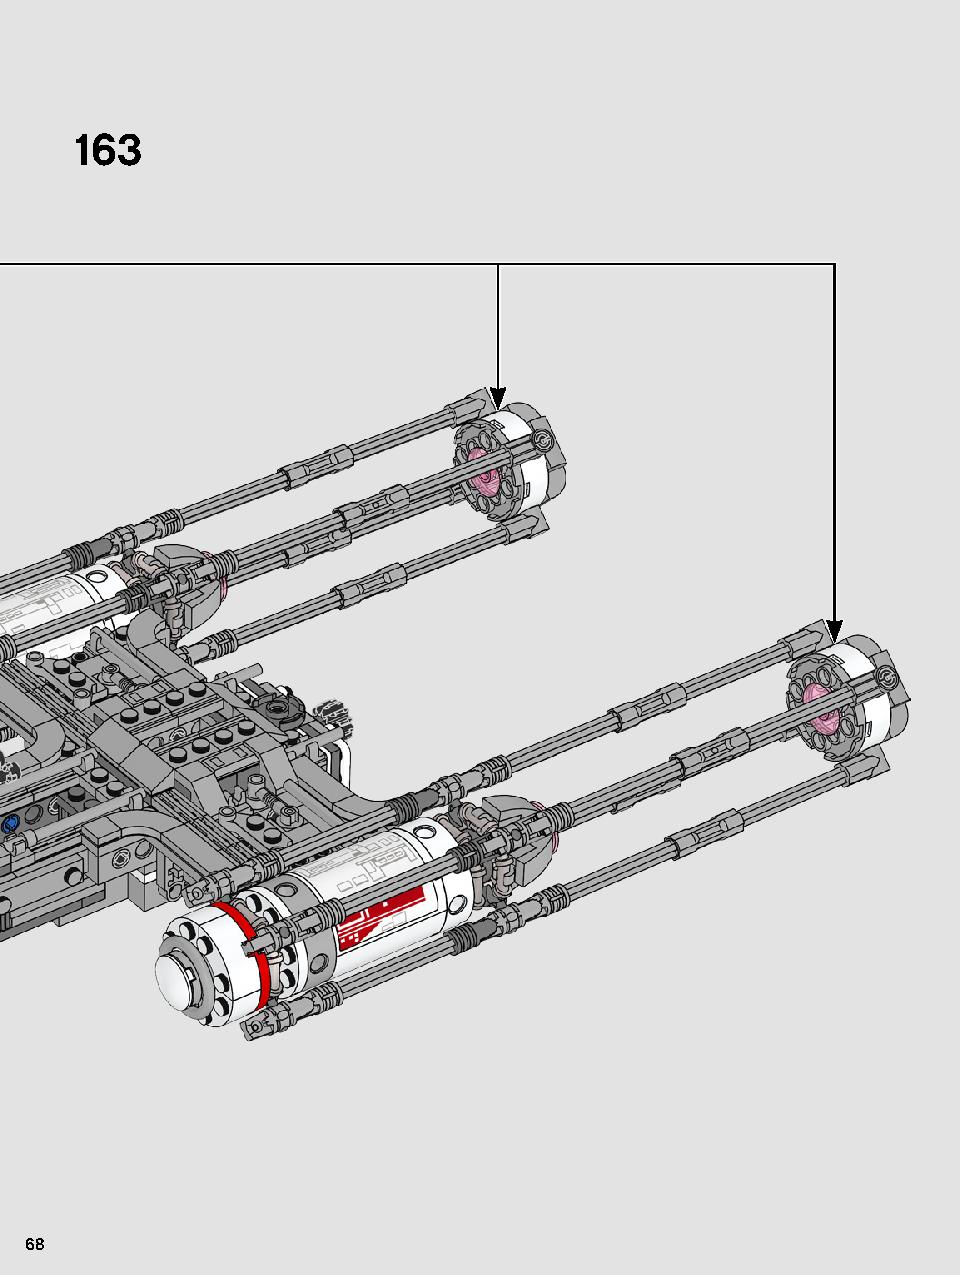 Resistance Y-Wing Starfighter 75249 LEGO information LEGO instructions 68 page